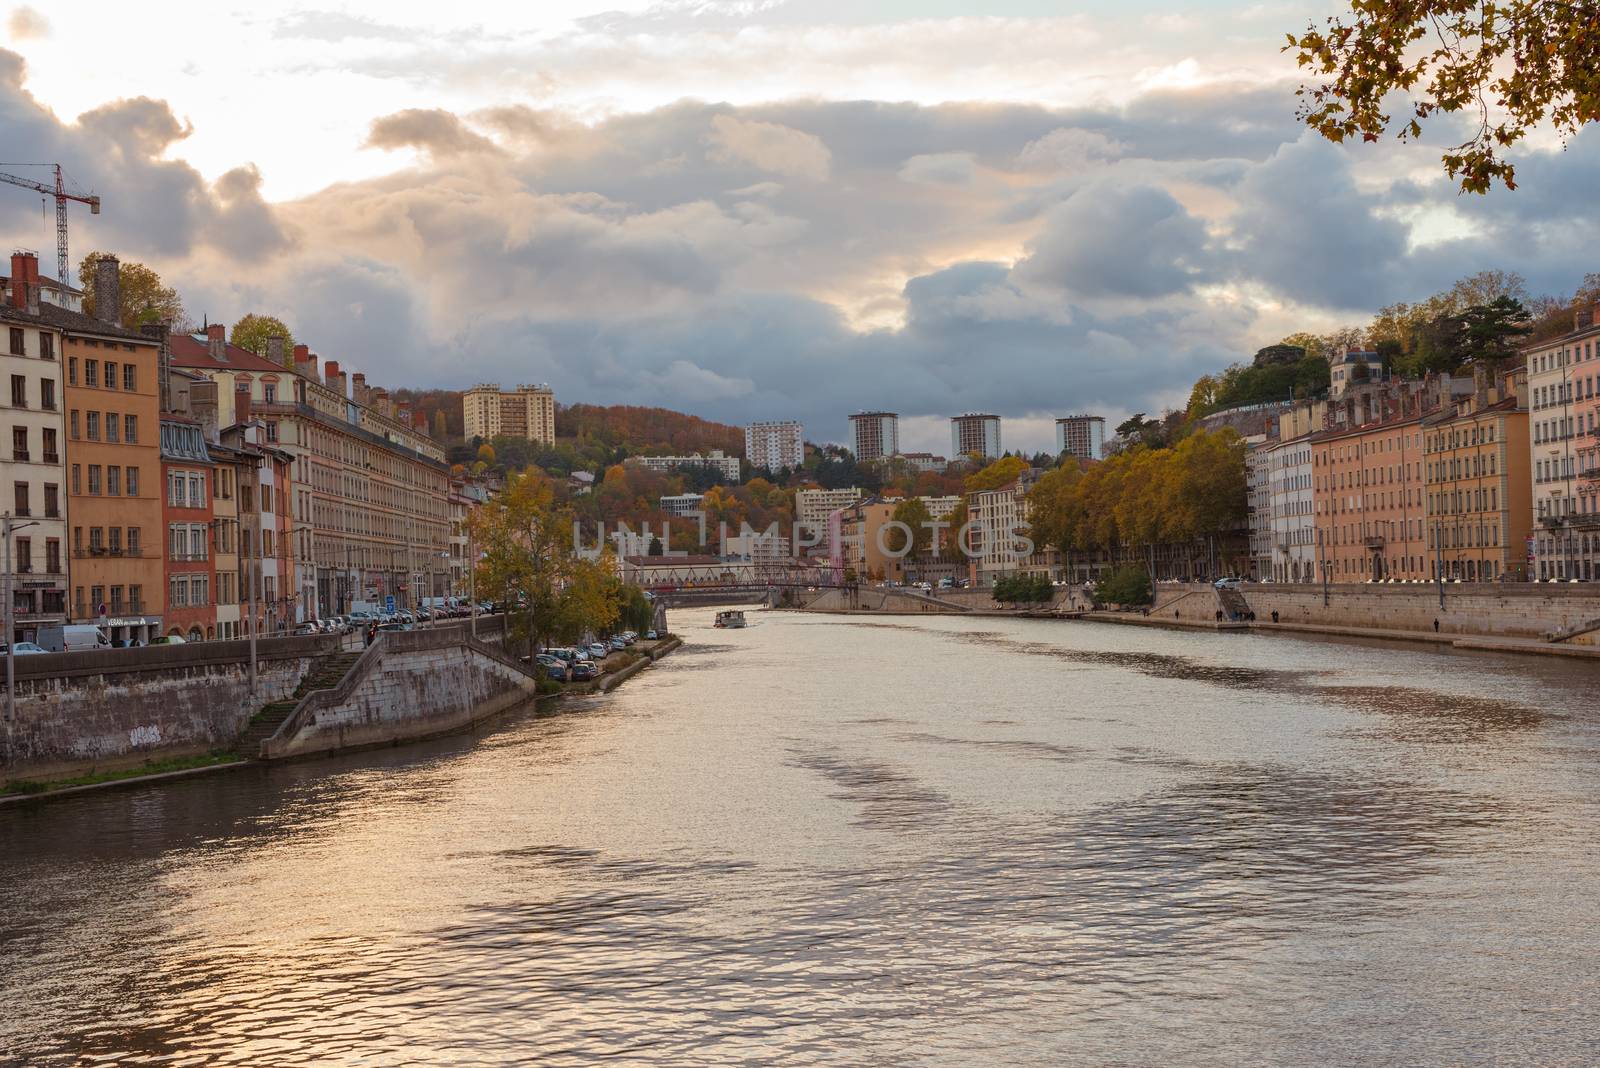 The Saone River  in Lyon at Dusk by jfbenning